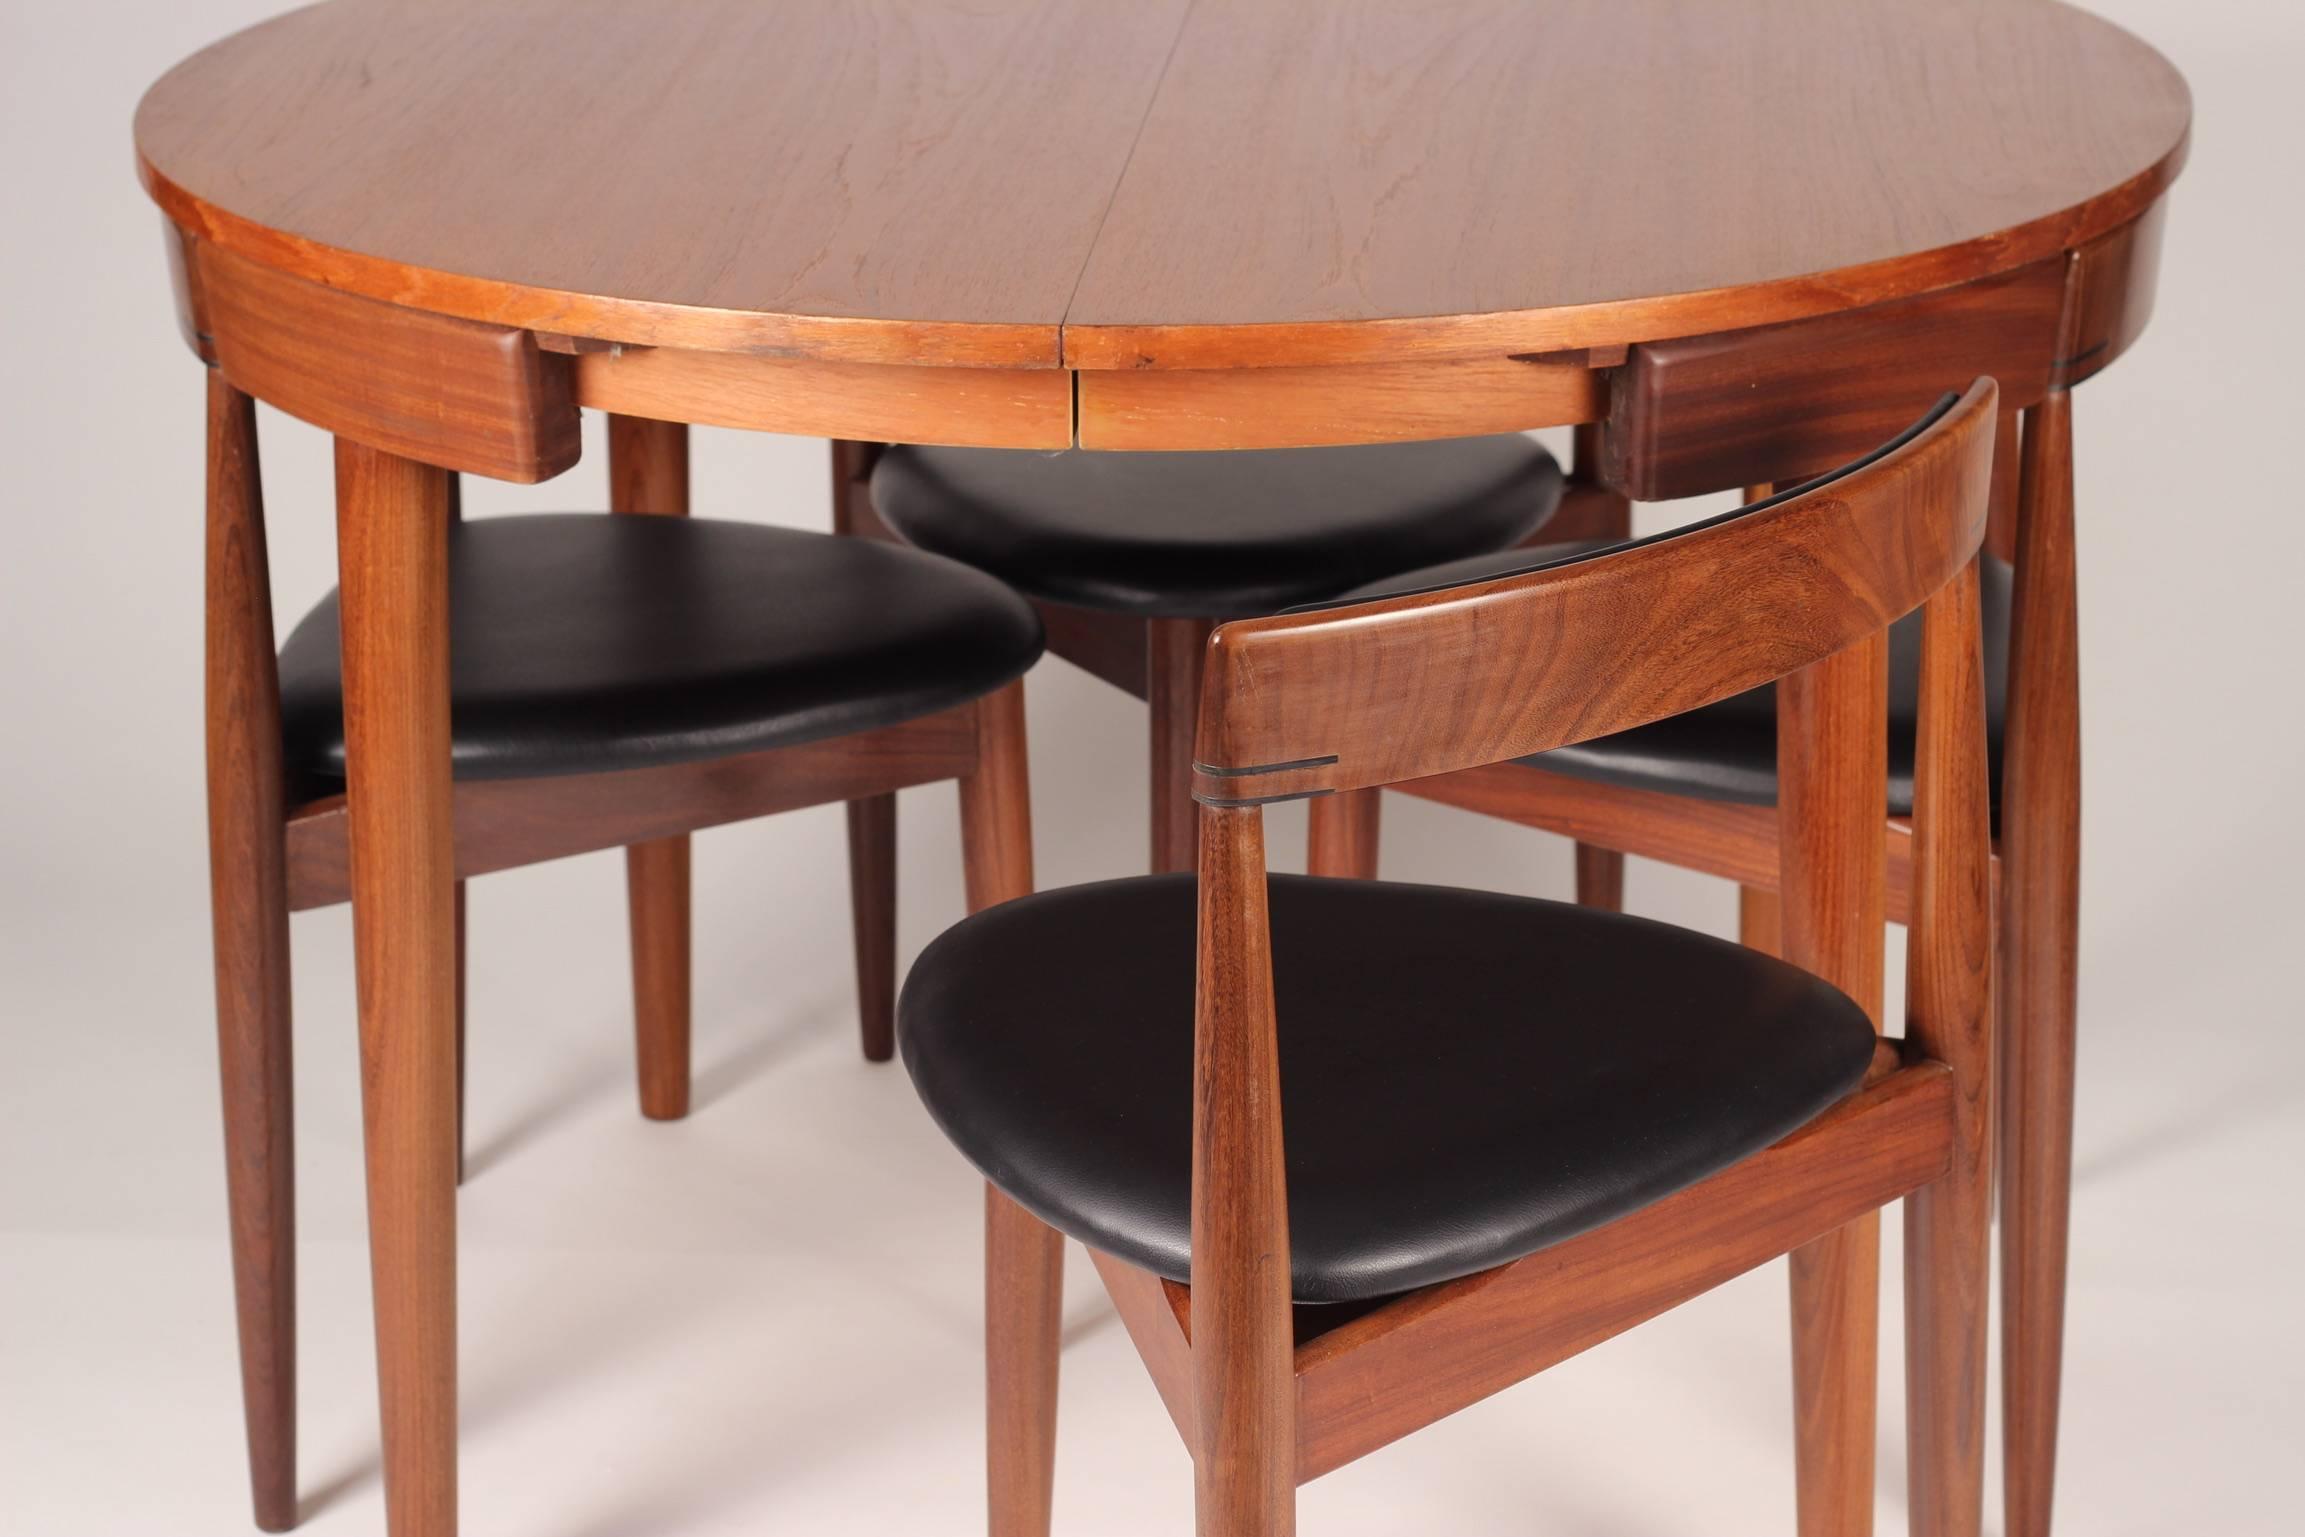 Mid-20th Century Scandinavian Modern Dining Table and Six Chairs Model Roundette by Frem Røjle 